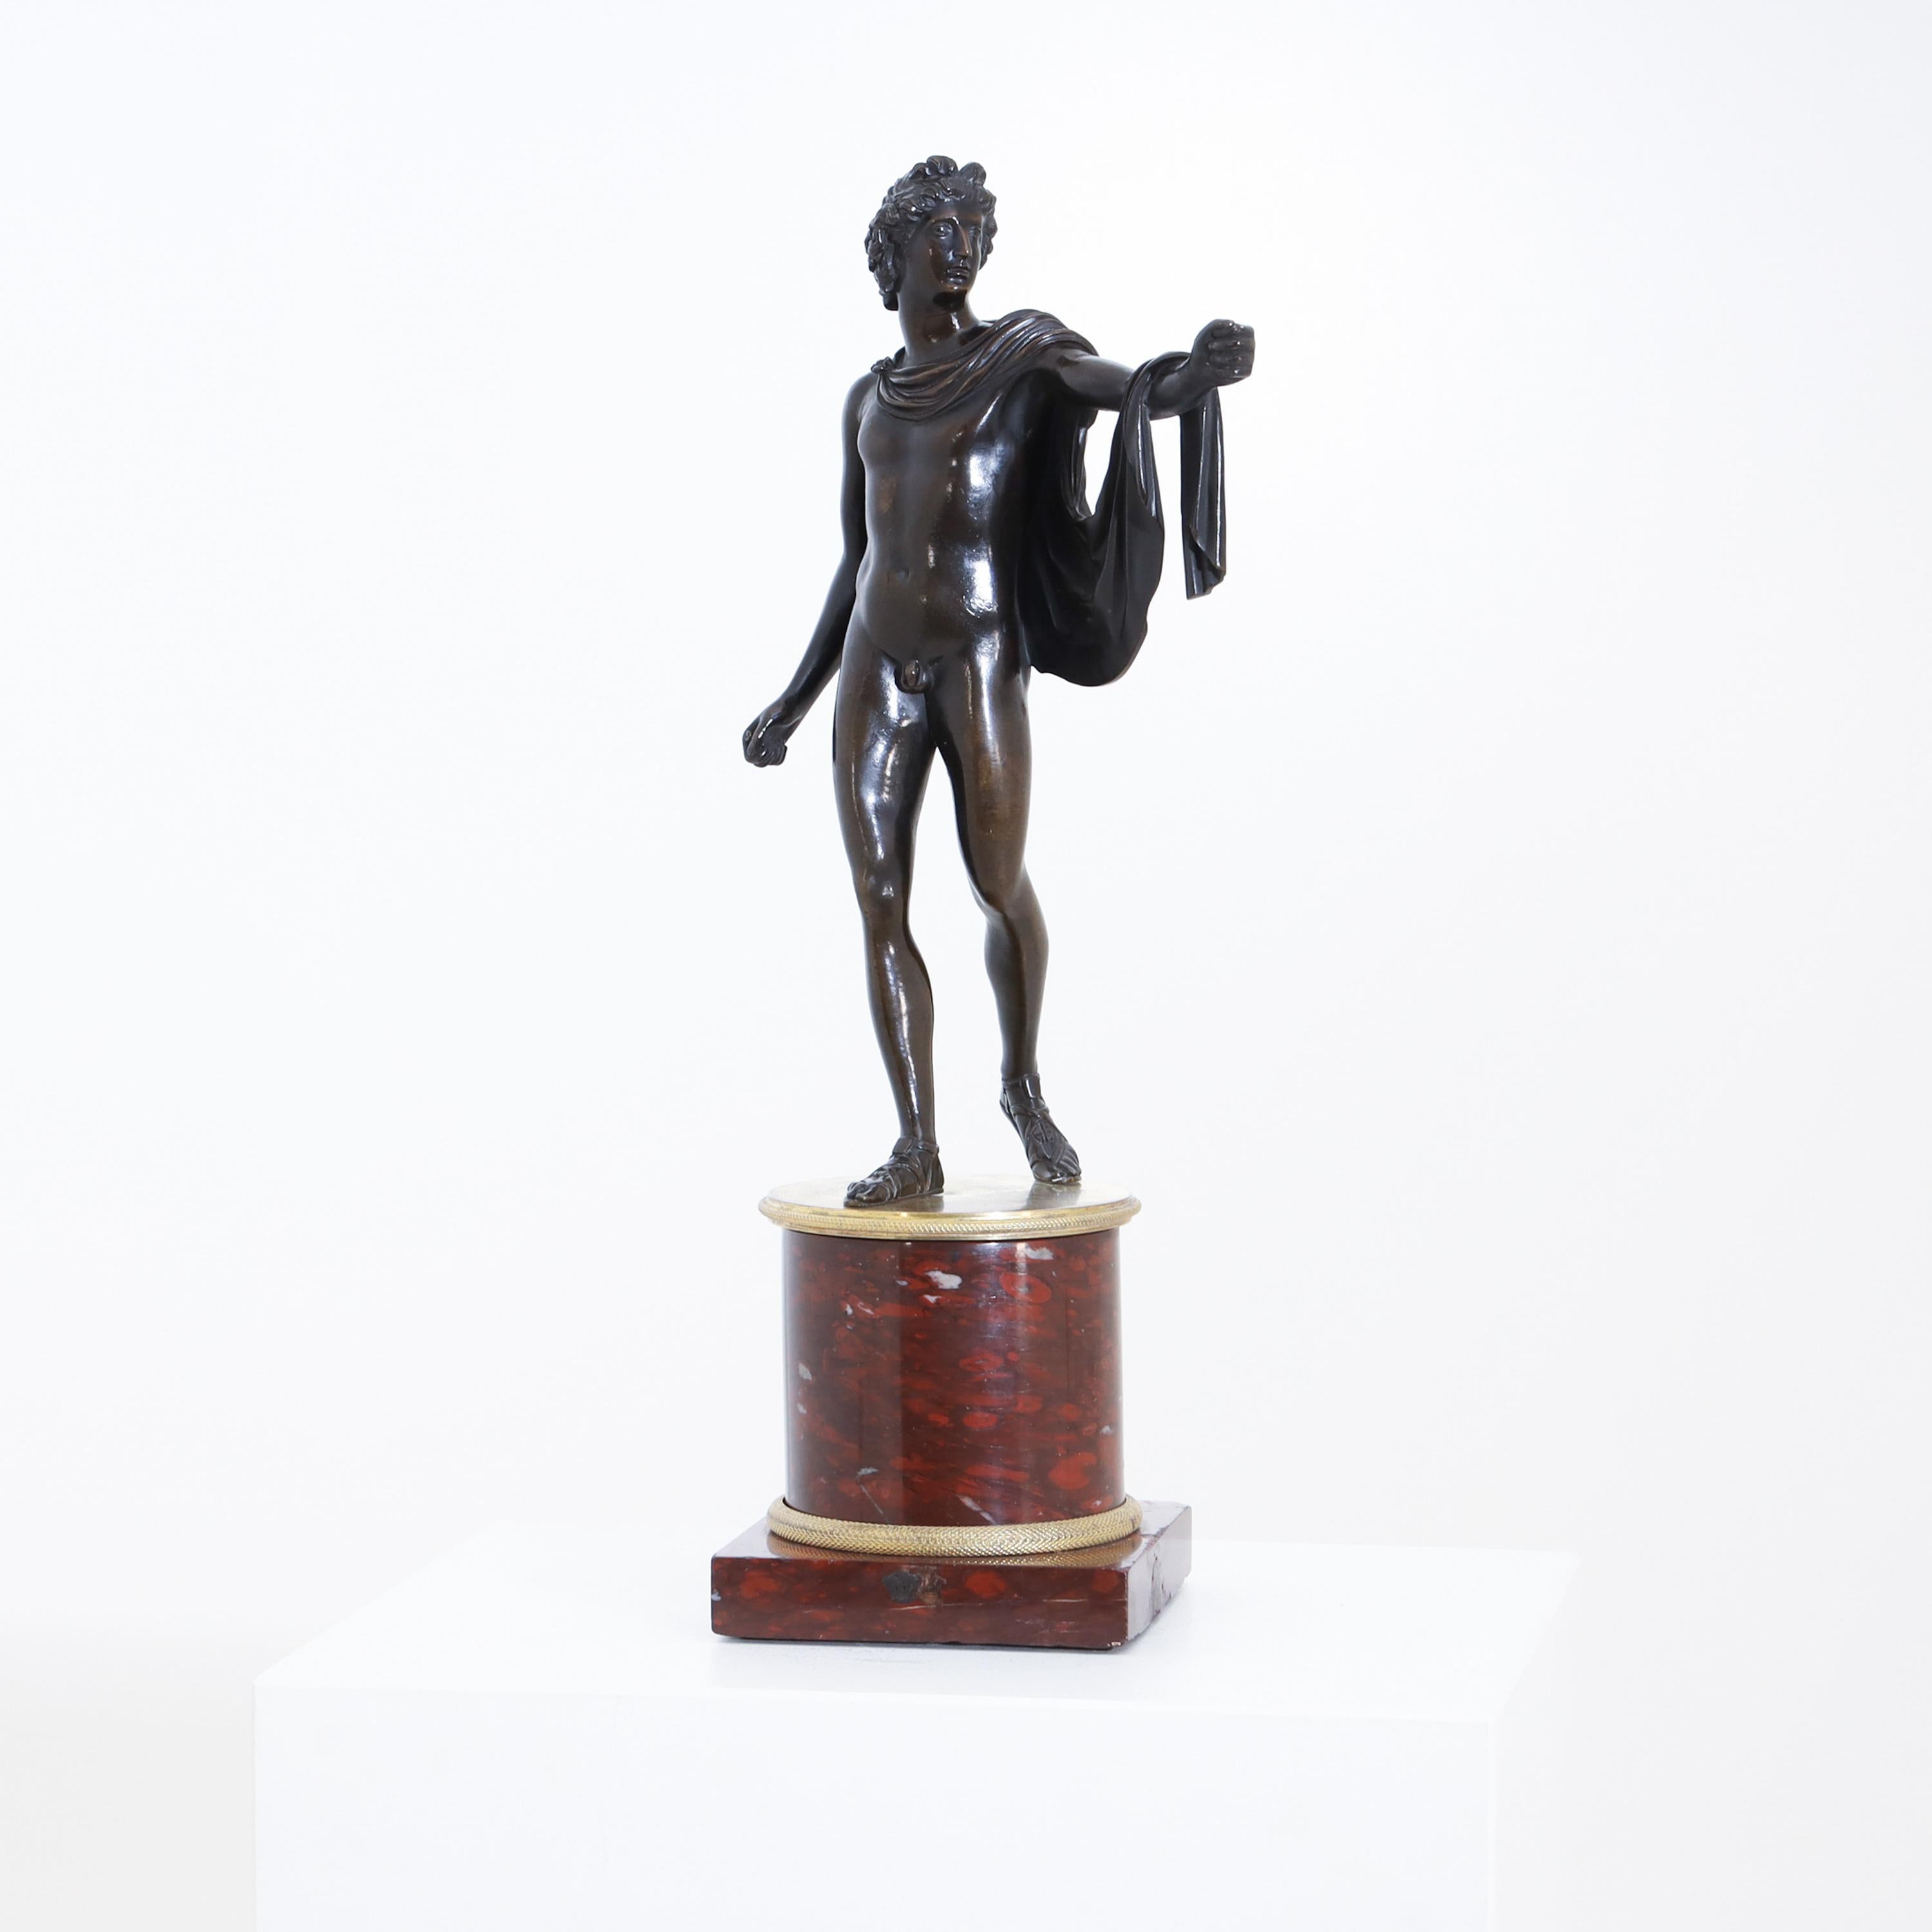 Bronze figure of Apollo Belvedere standing on a red marble base with fire-gilded profiles. Early French work after the famous original, which was in the Louvre at the time, due to Napoleon's Italian campaign (1798-1815).